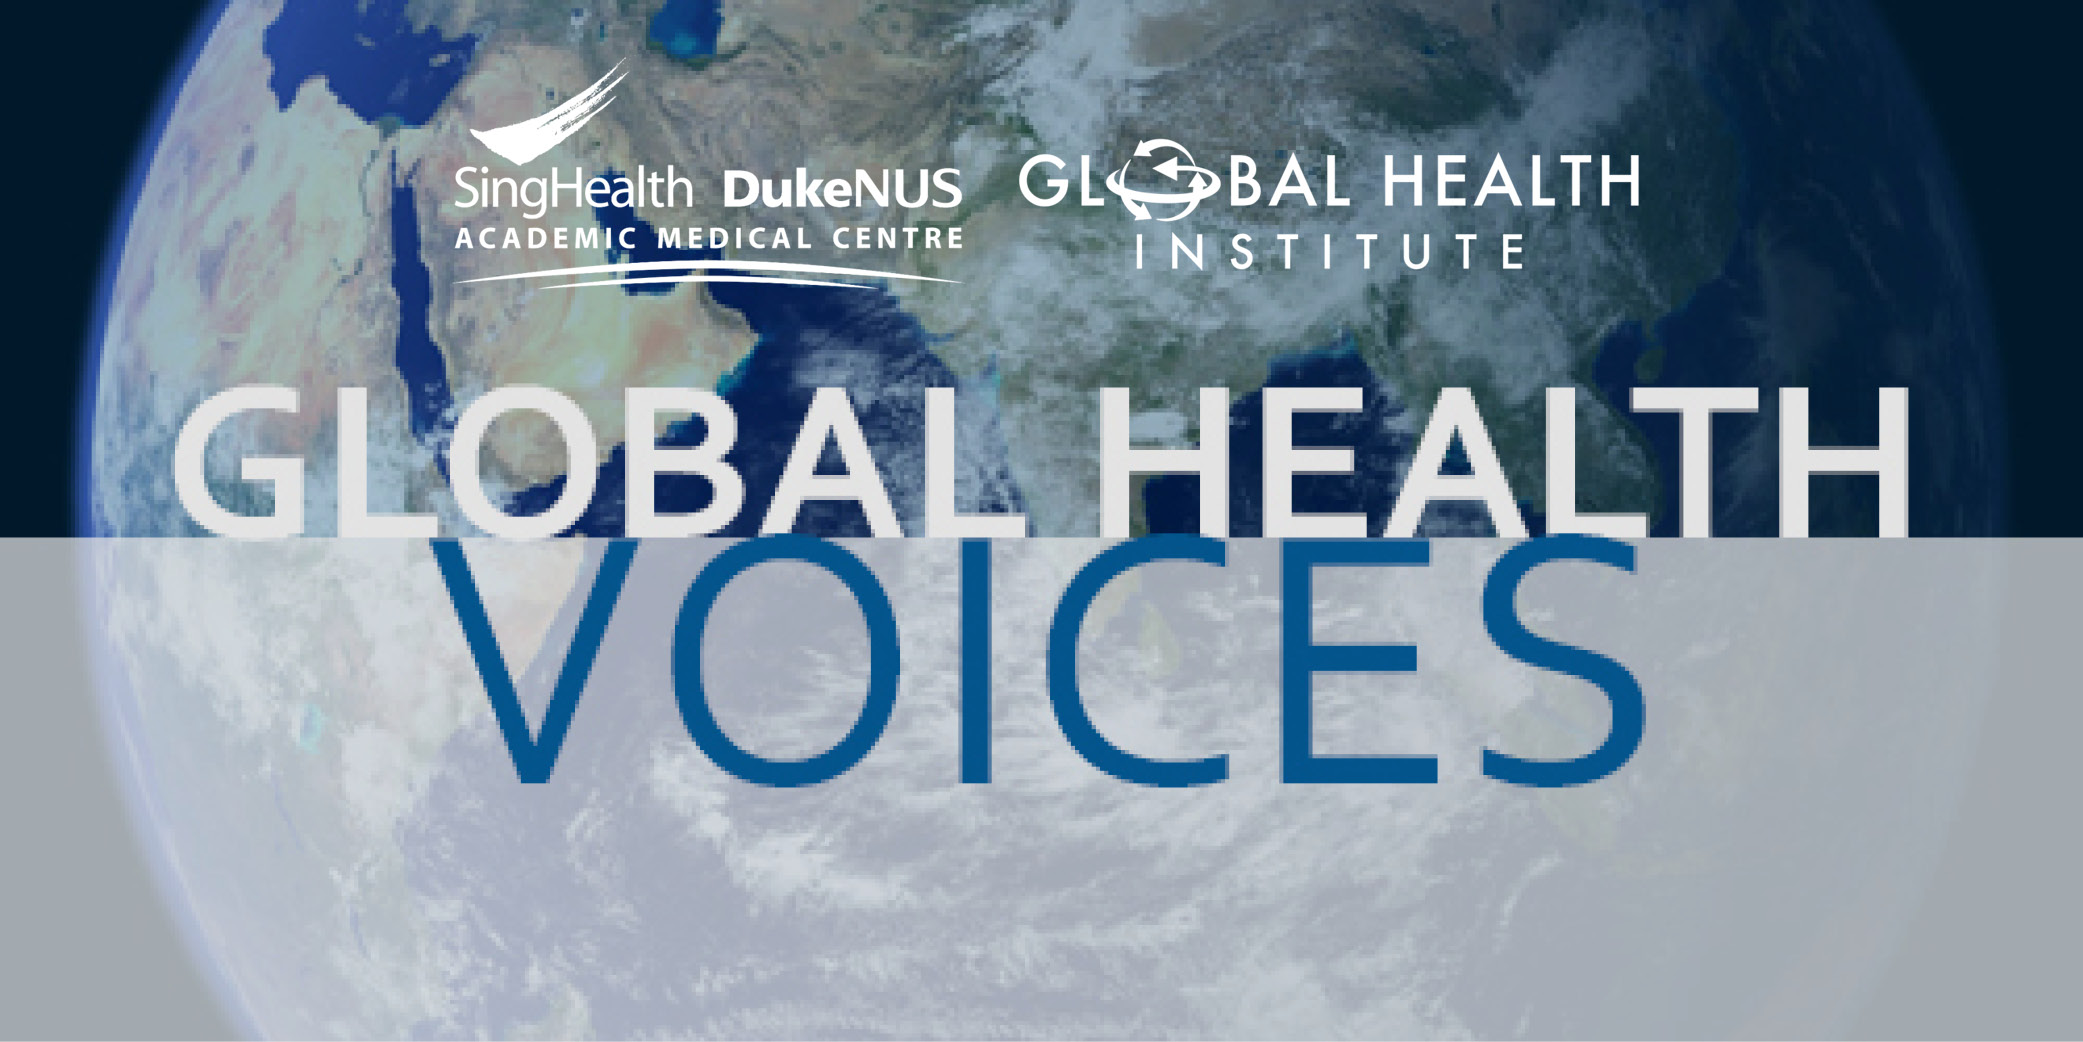 Global Health Voices